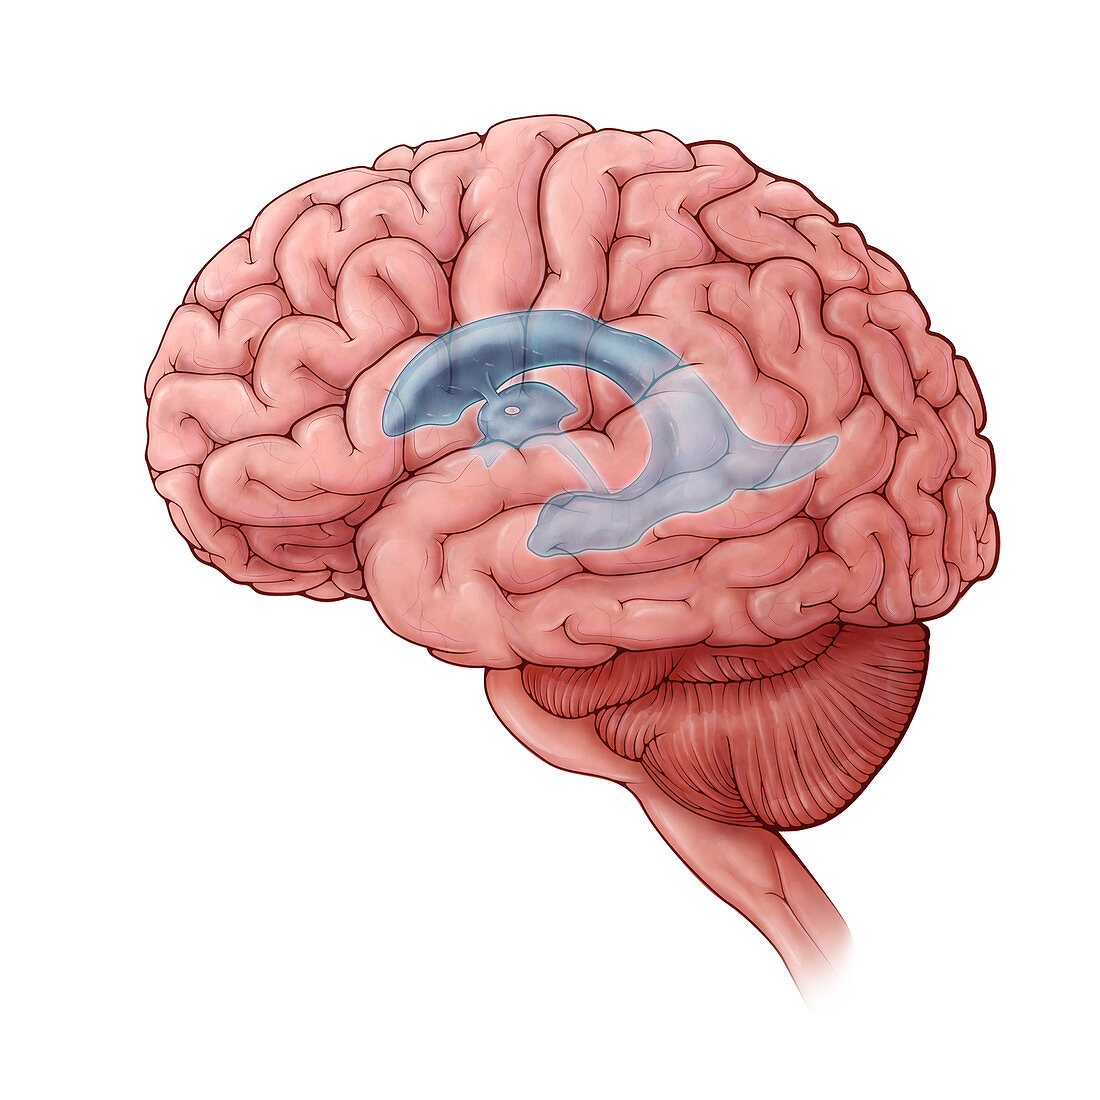 Lateral Ventricles, Illustration